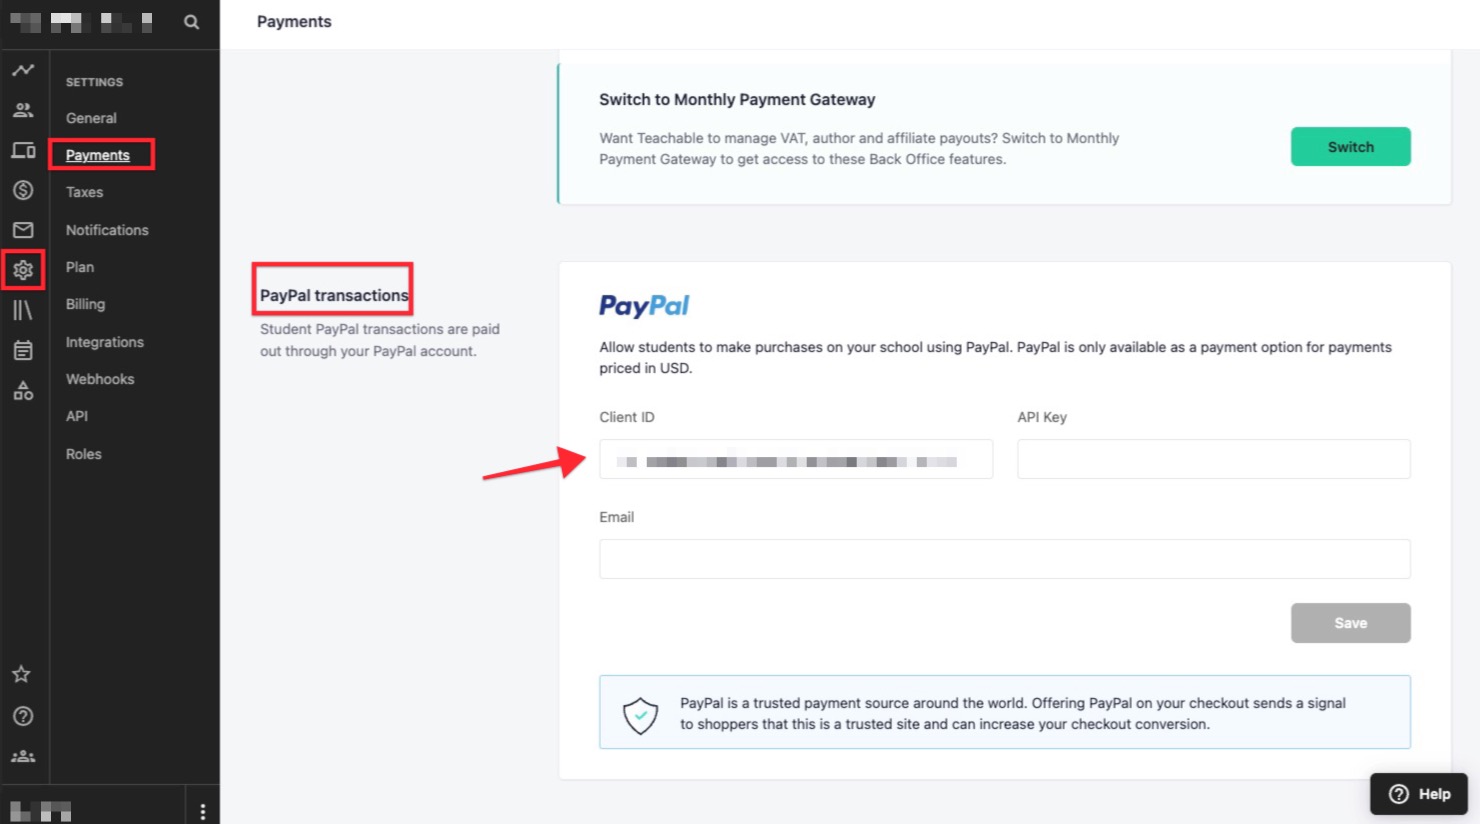 The screen shows the SETTINGS > PAYMENTS menu of Teachable school admin. There is an arrow pointing to the PAYPAL CLIENT ID field.